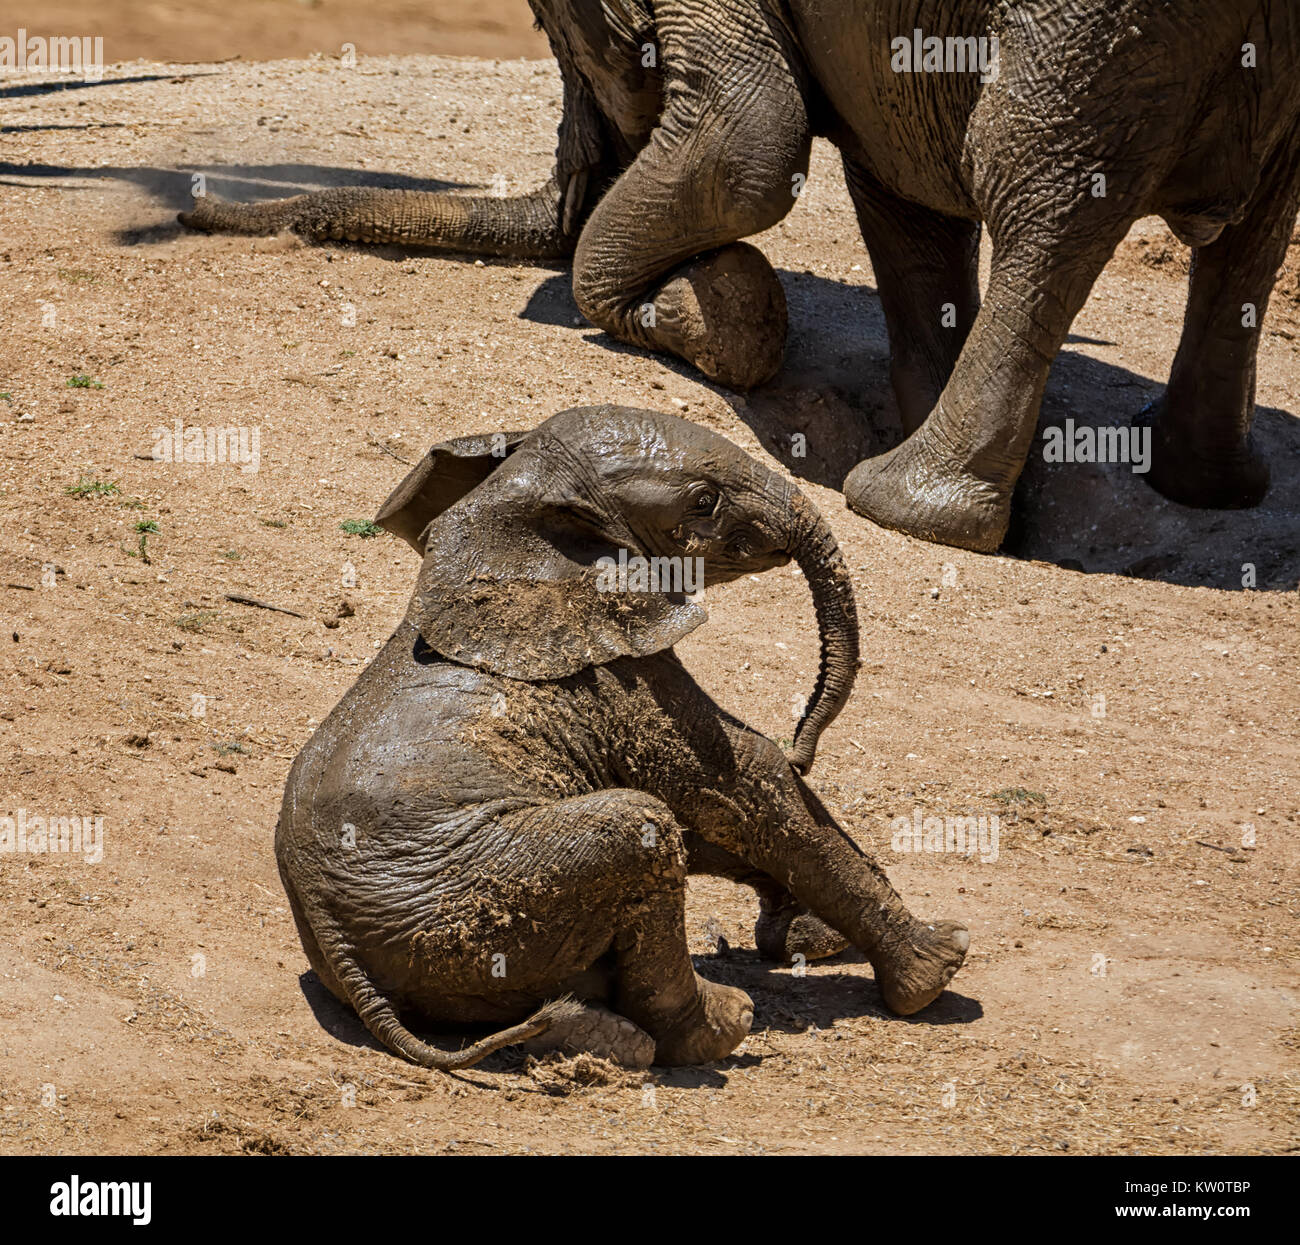 An Elephant calf rolls in the dust after a mud bath Stock Photo